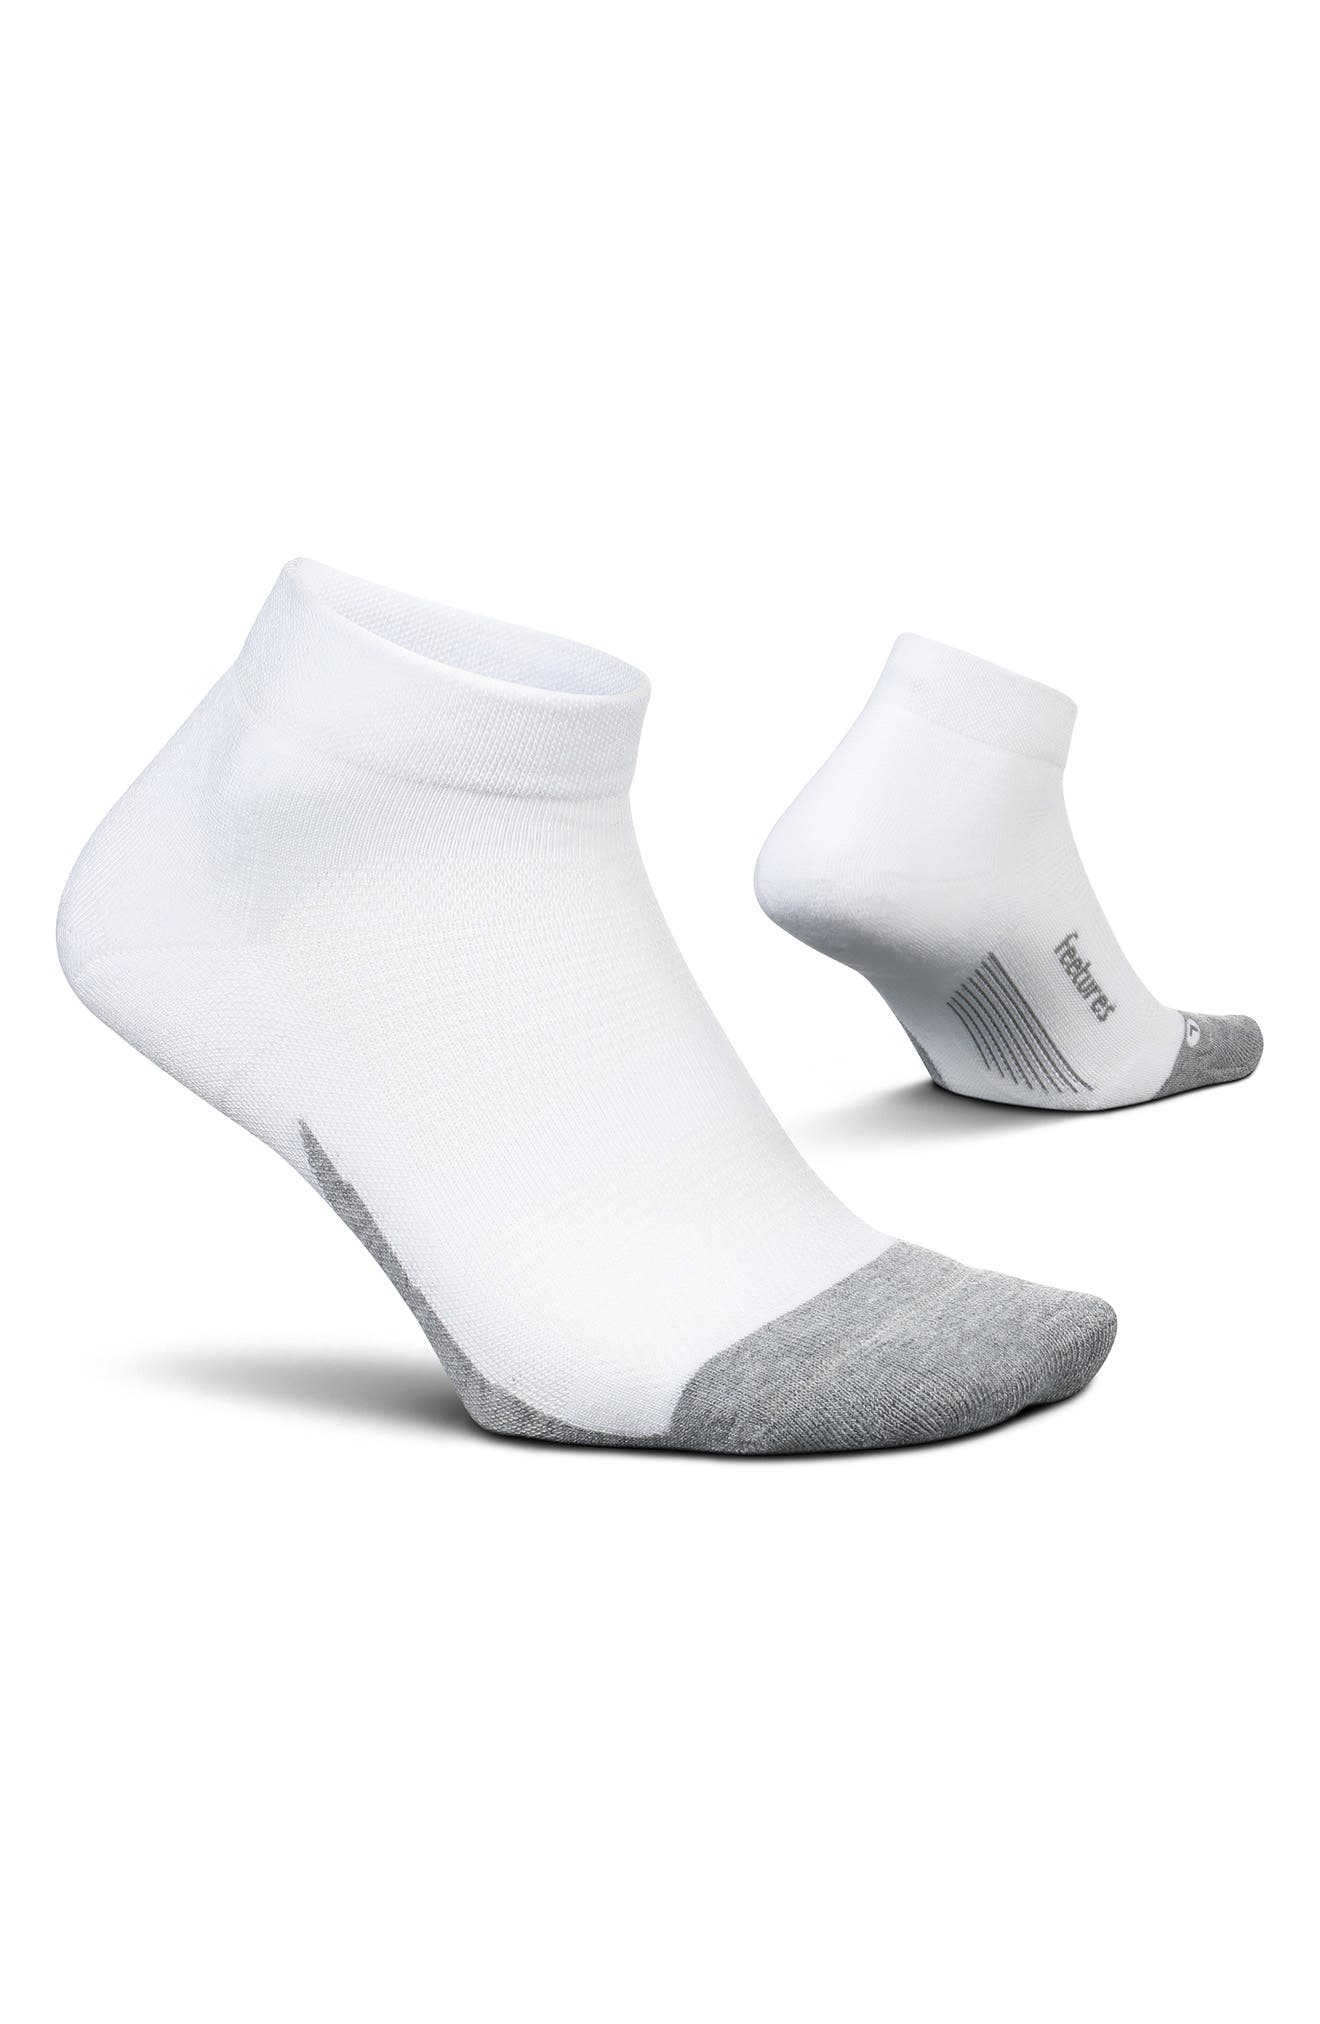 Feetures Elite Max Cushion Ankle Socks in White at Nordstrom, Size Medium